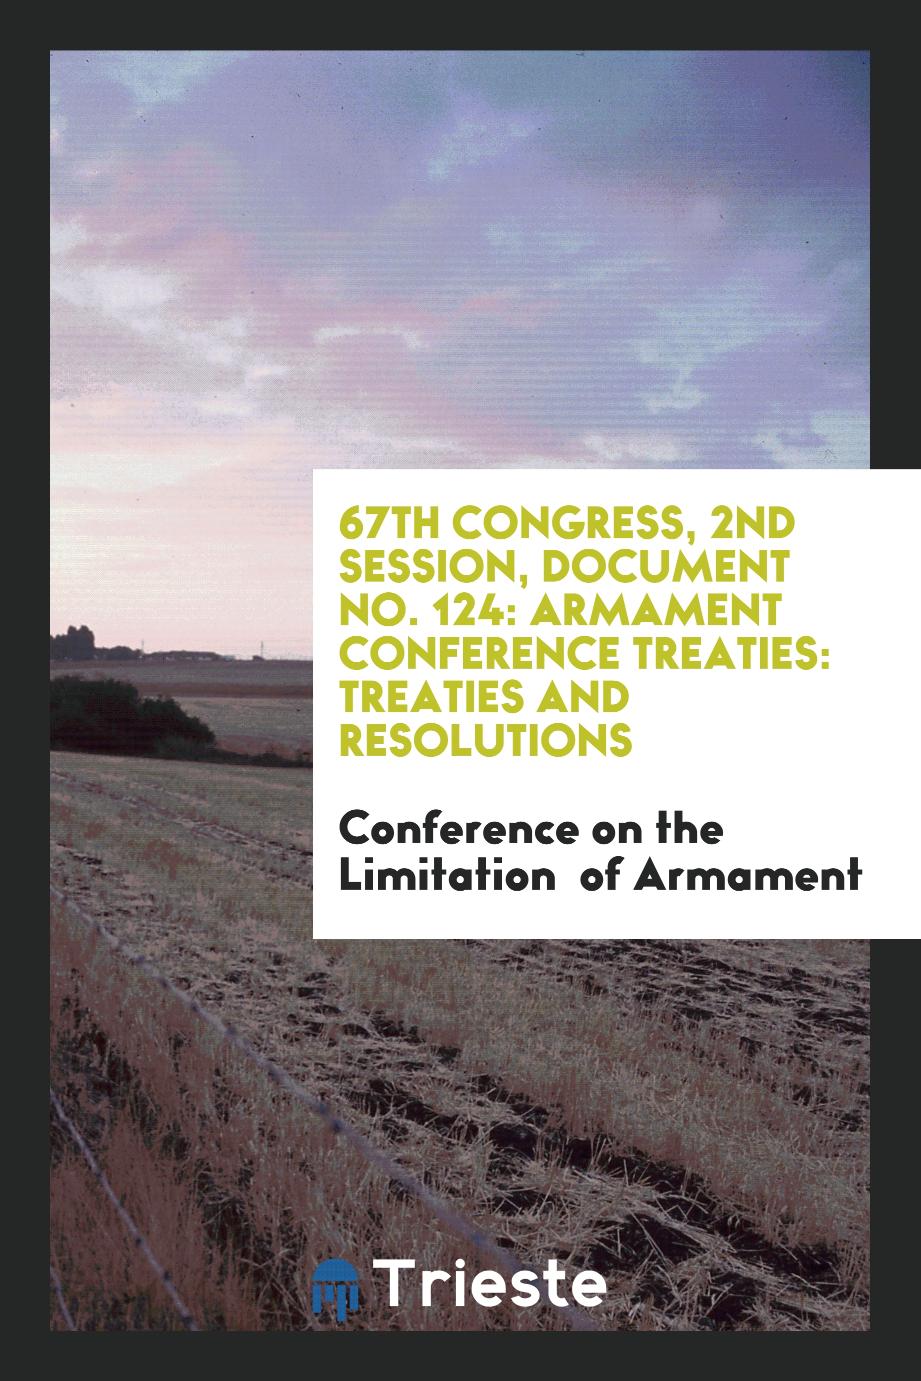 67th Congress, 2nd Session, Document No. 124: Armament conference treaties: treaties and resolutions